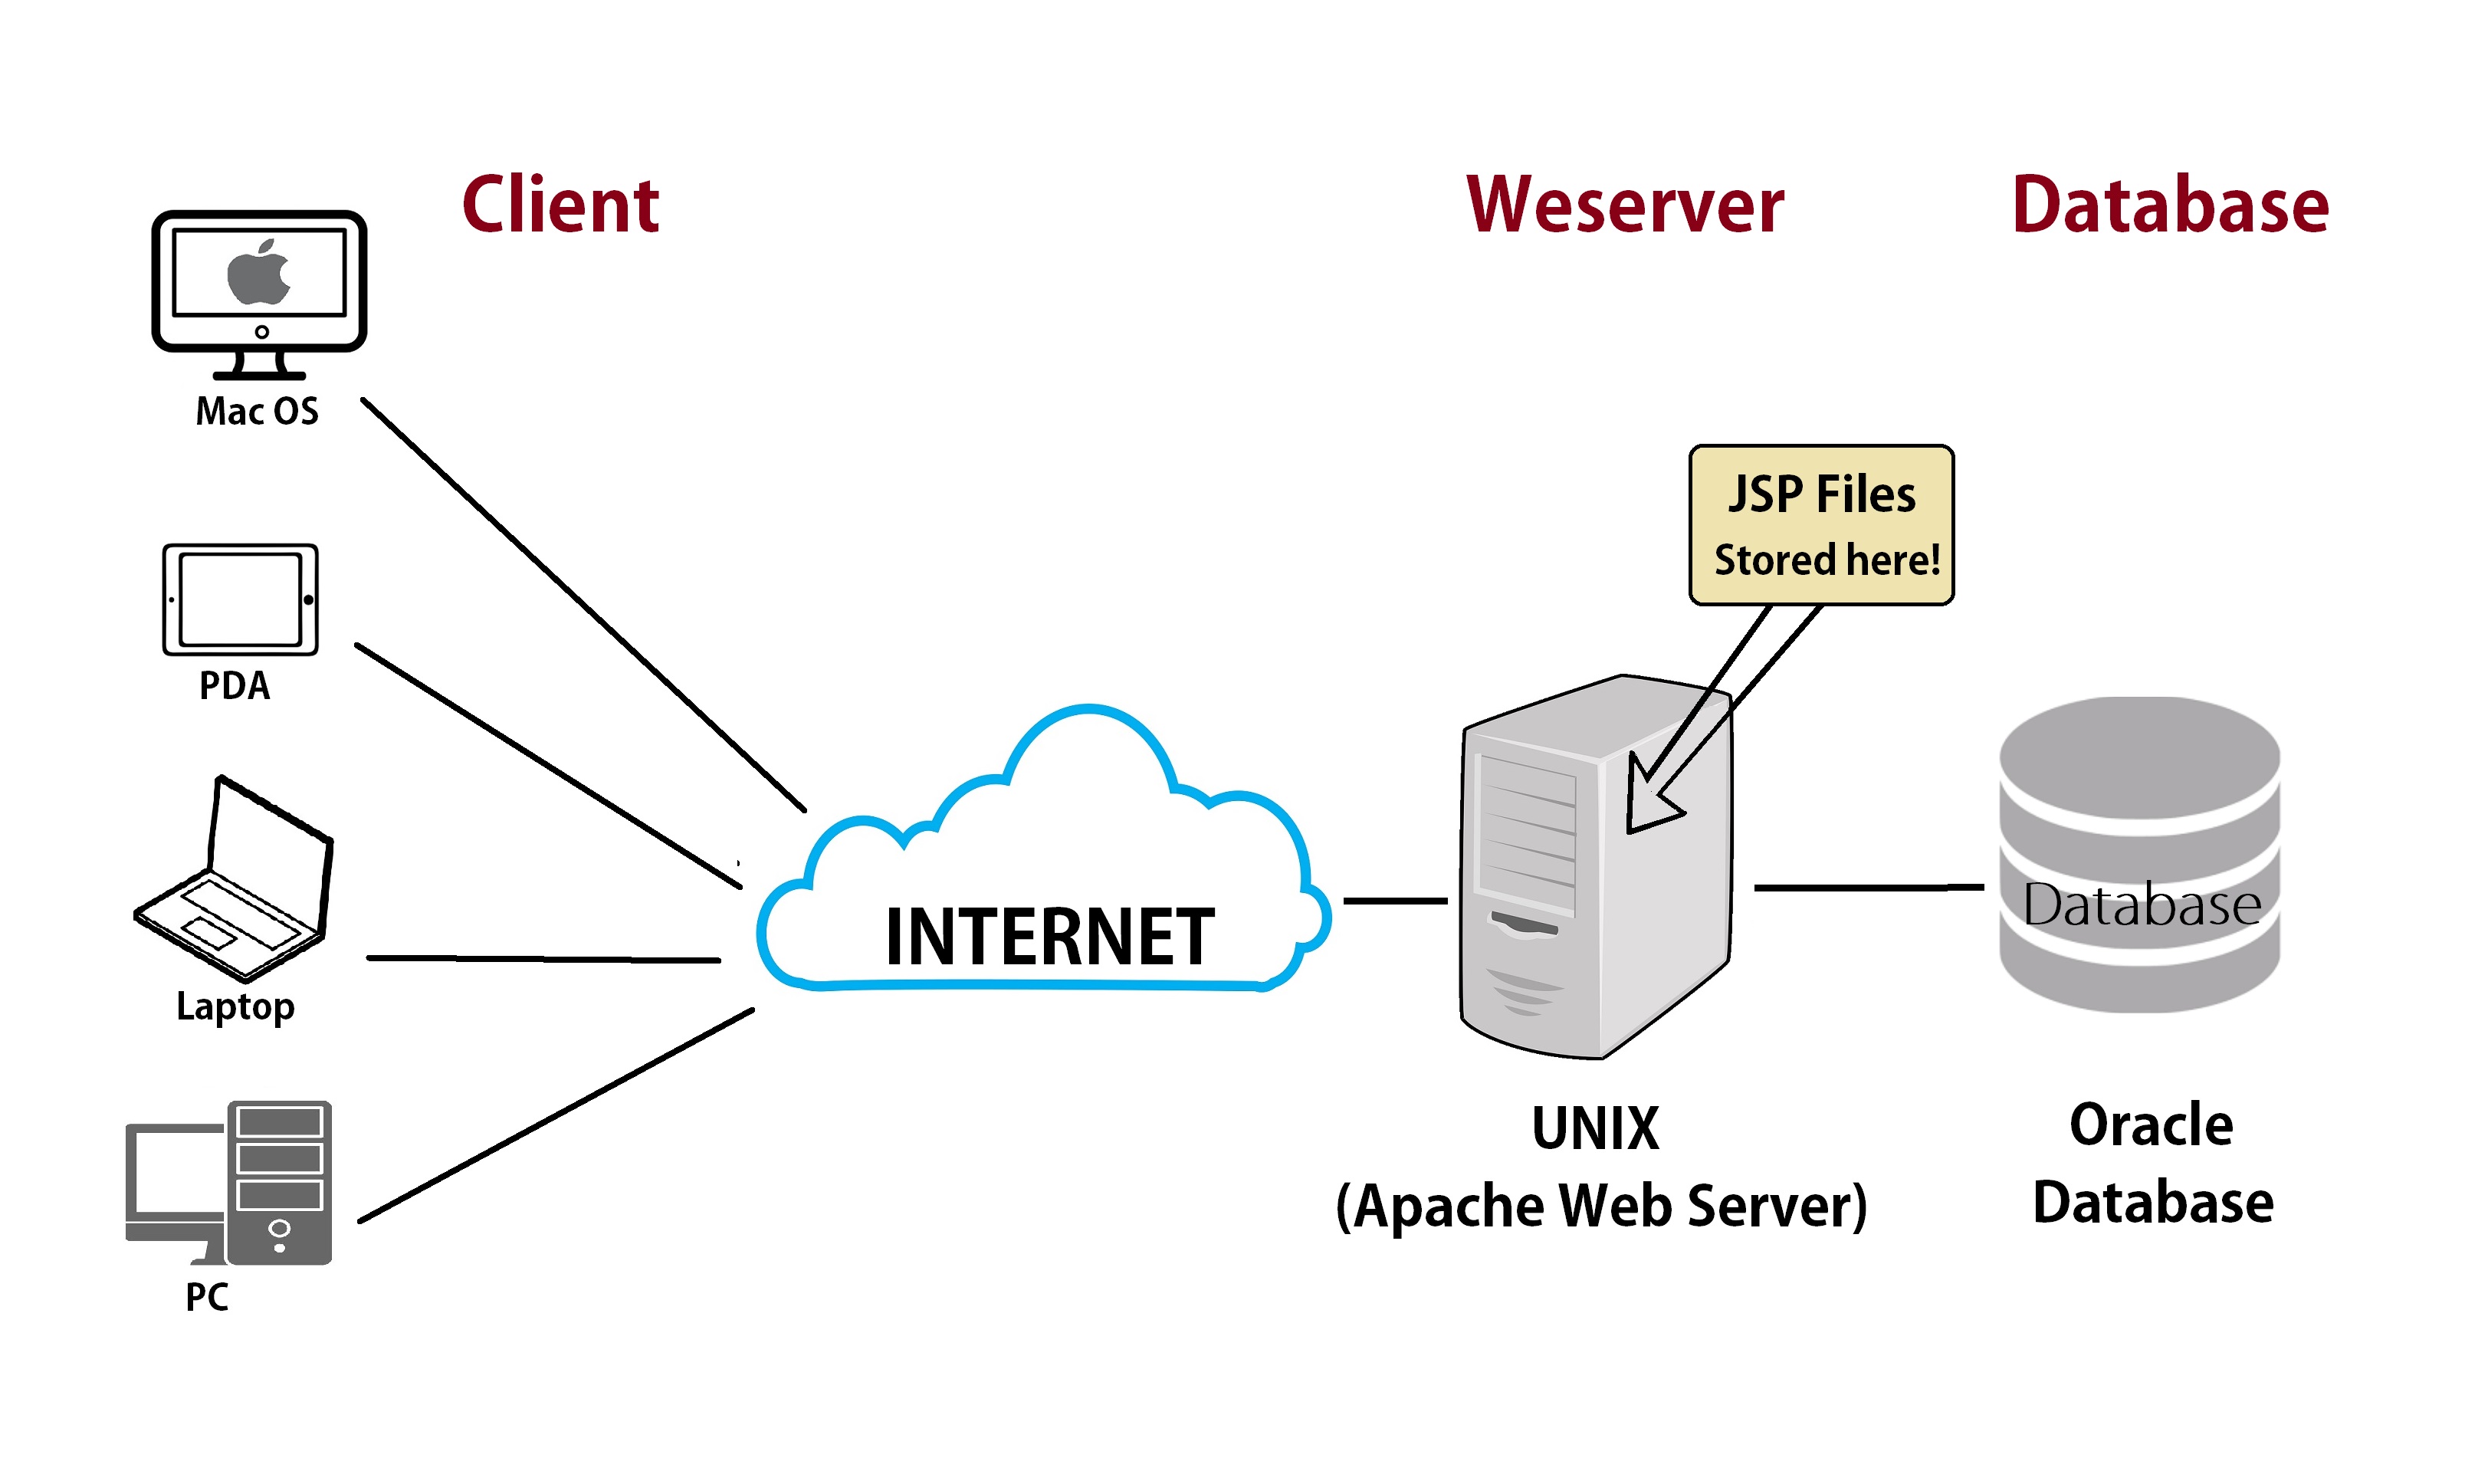 What is a Web Server?